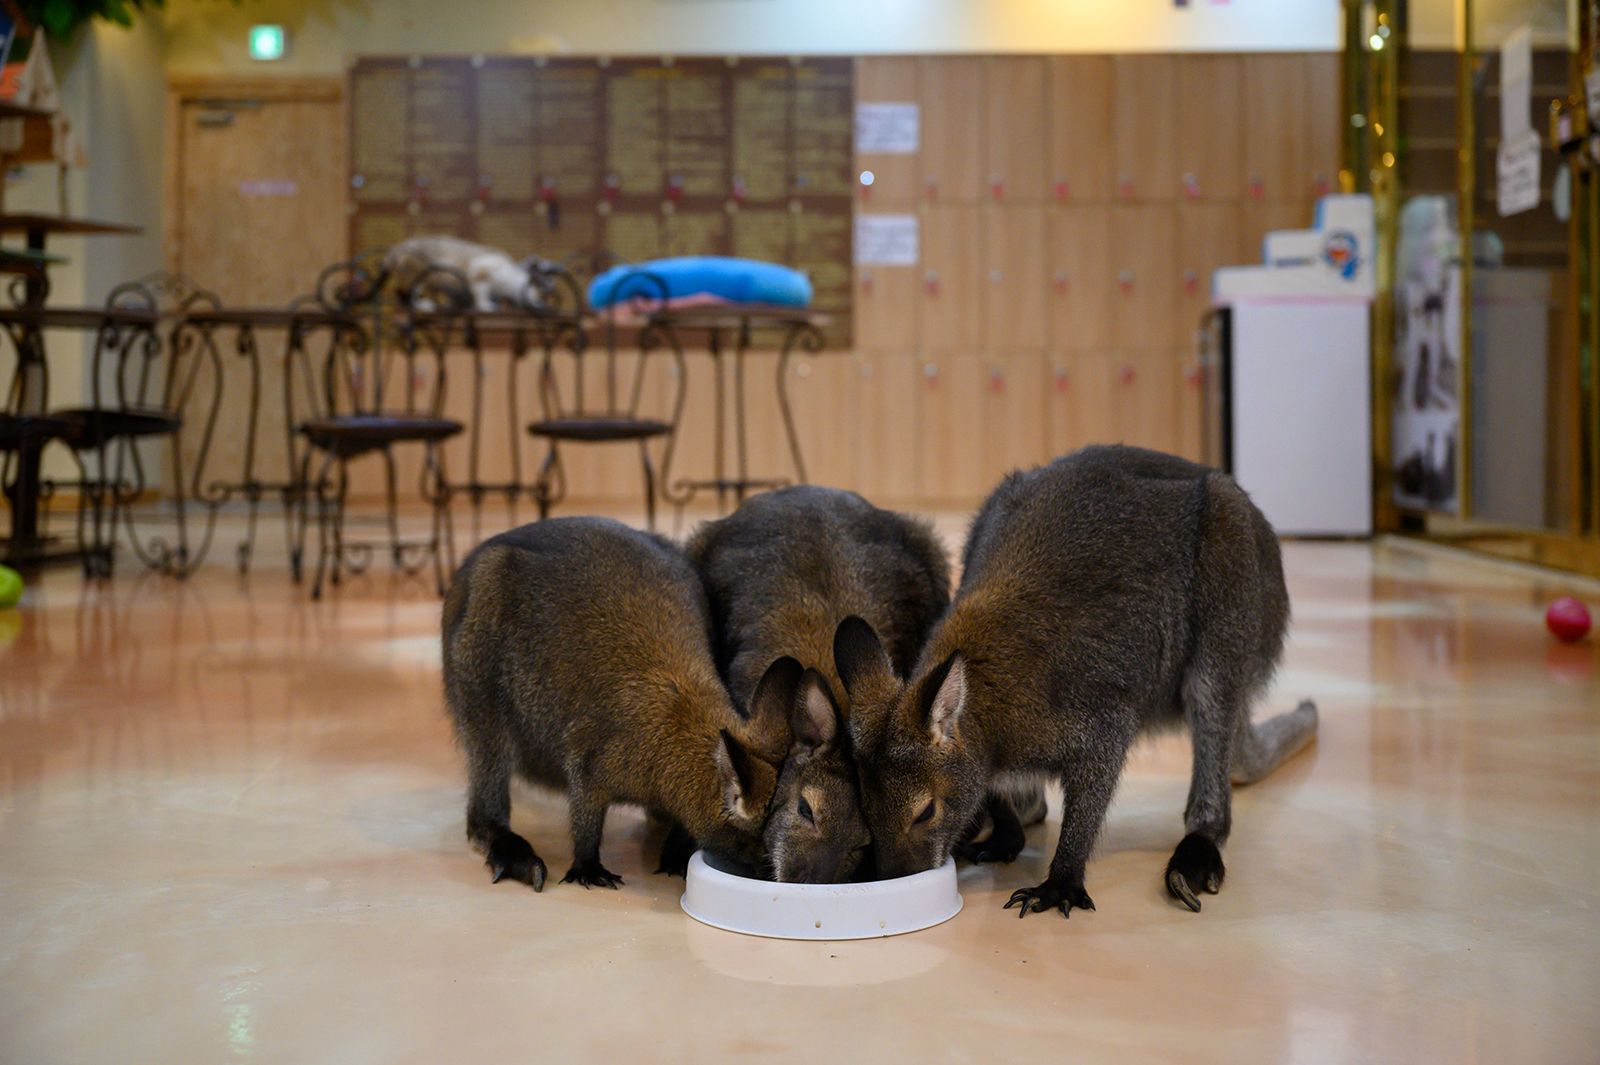 Korea Puts the Brakes on Animal Cafes: Too Cute or Cruelty?